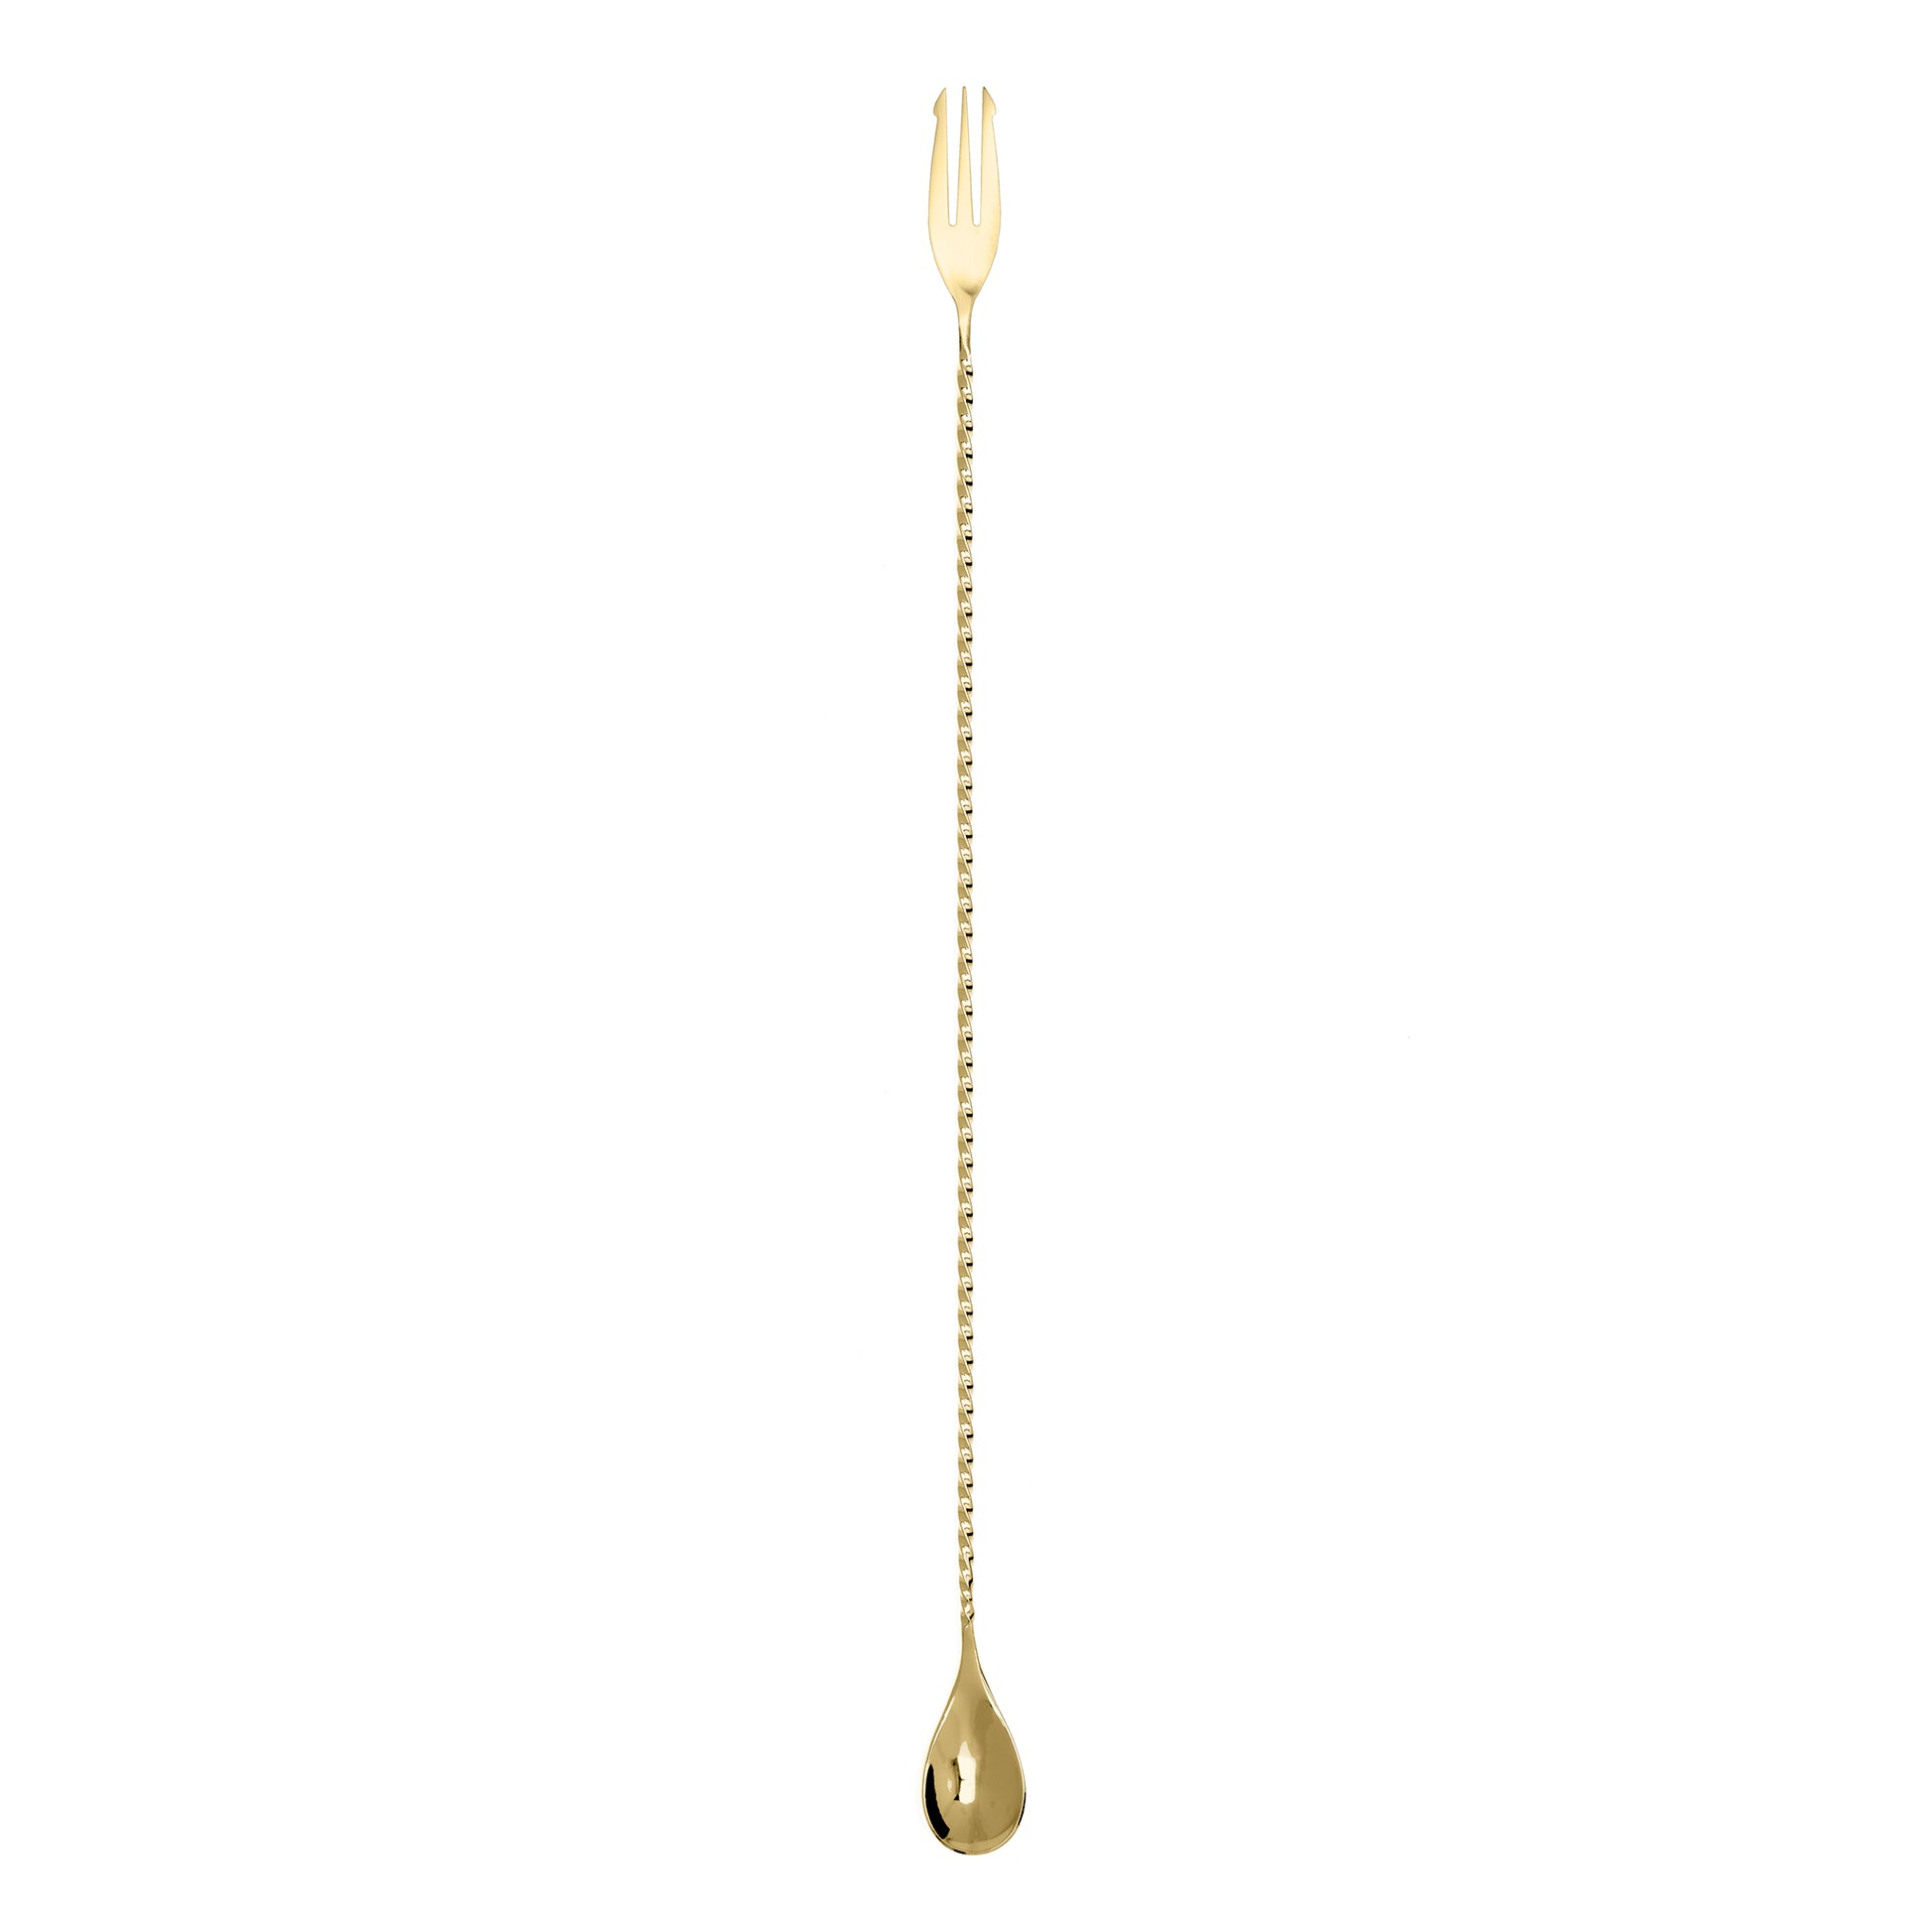 TRIDENT BARSPOON / GOLD-PLATED / 50cm